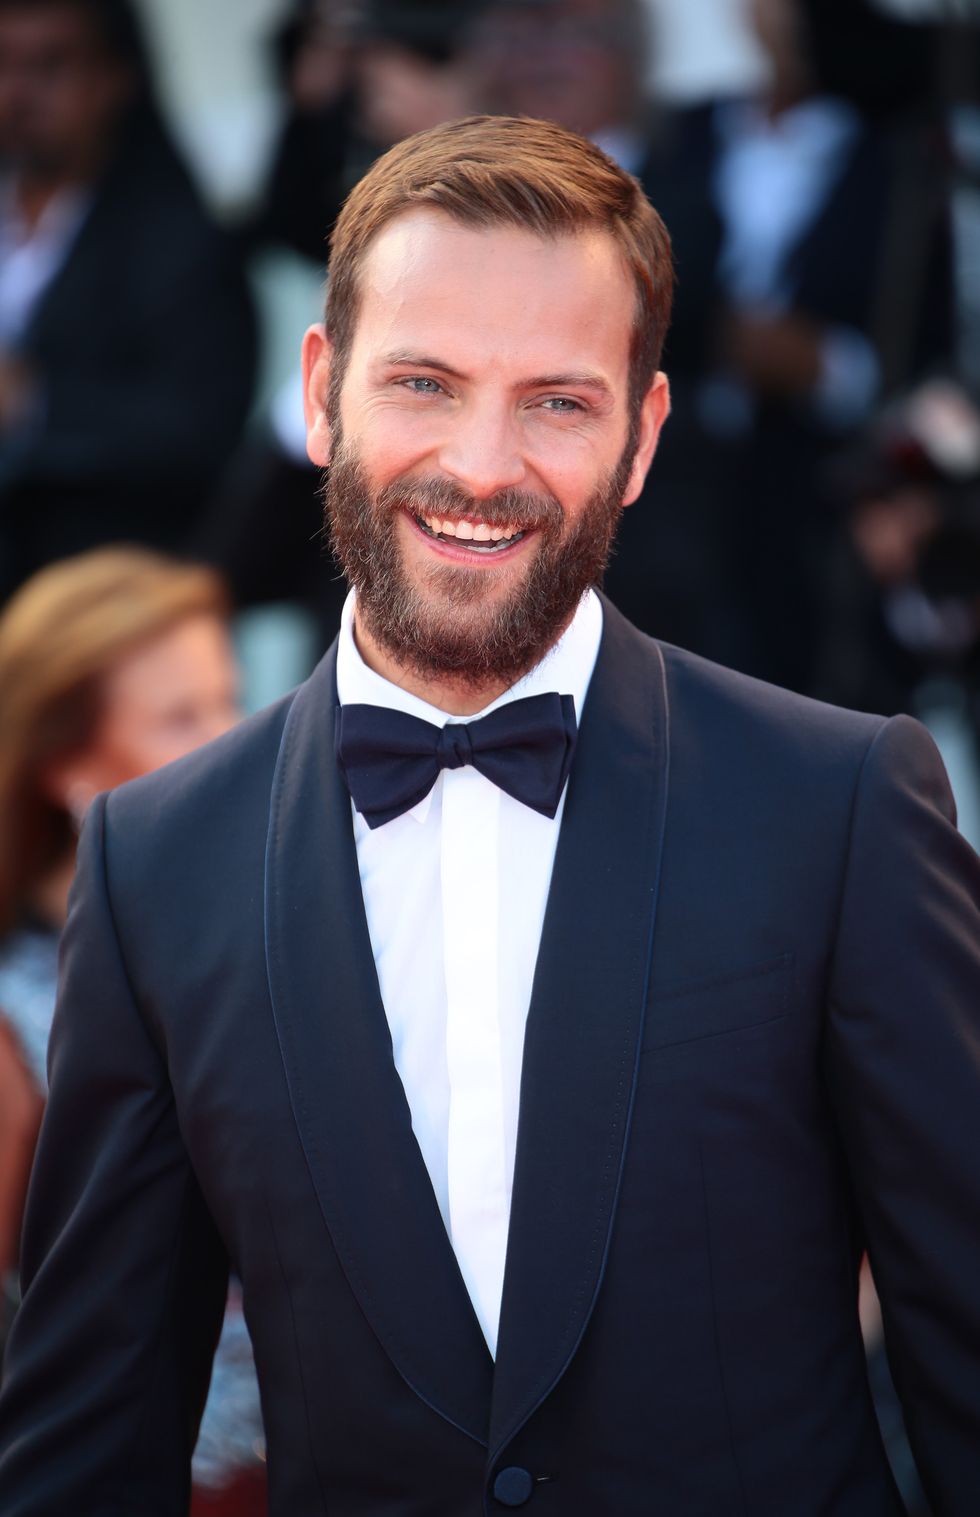 Alessandro Borghi walks the red carpet ahead of the 'Downsizing' screening and Opening Ceremony during the 74th Venice Film Festival at Sala Grande on August 30, 2017 in Venice, Italy (Photo by Matteo Chinellato/NurPhoto via Getty Images)